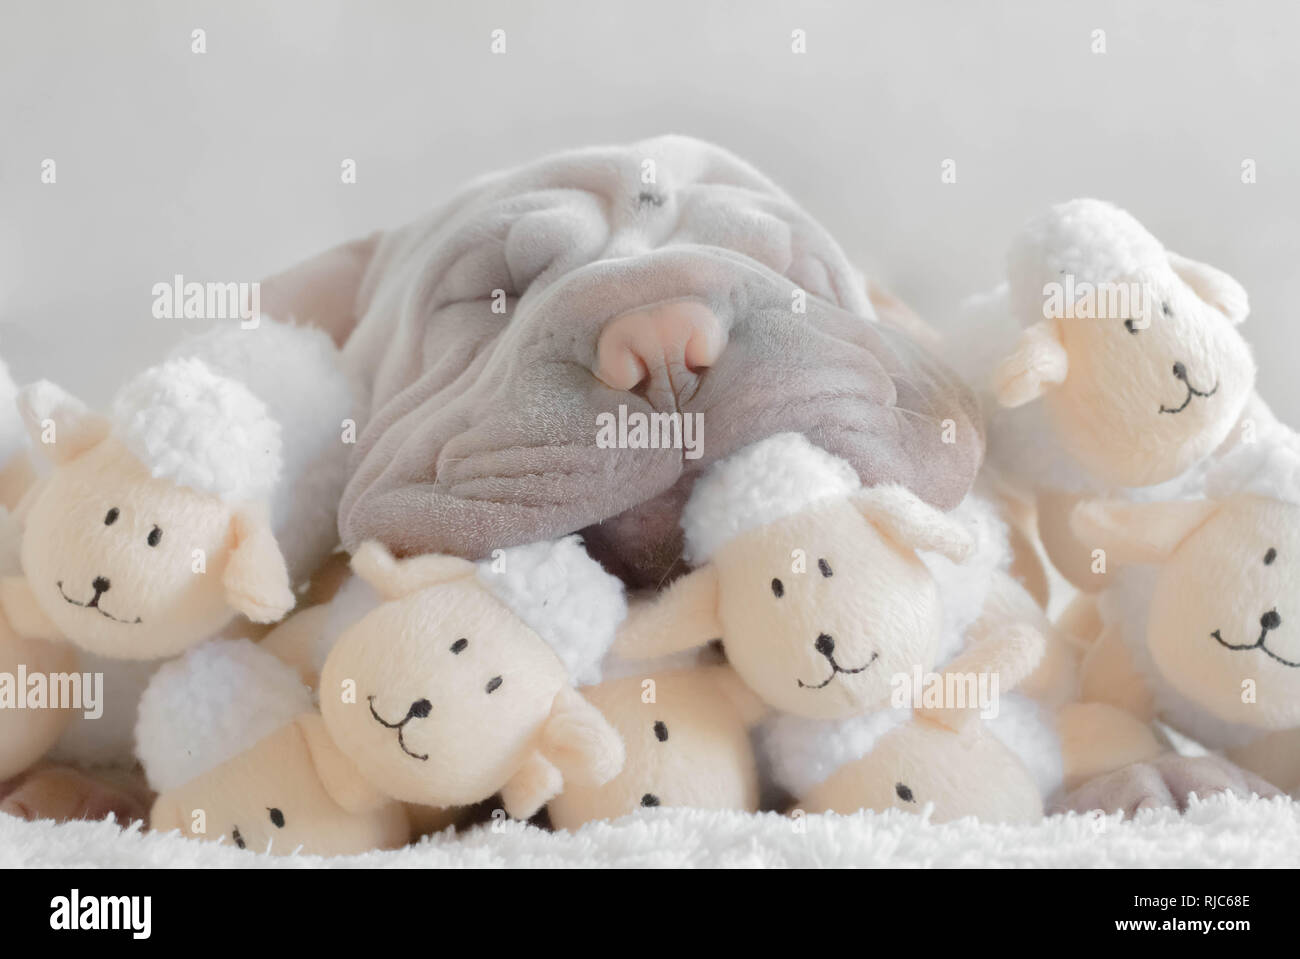 Shar pei puppy dog sleeping on a stack of soft toys Stock Photo